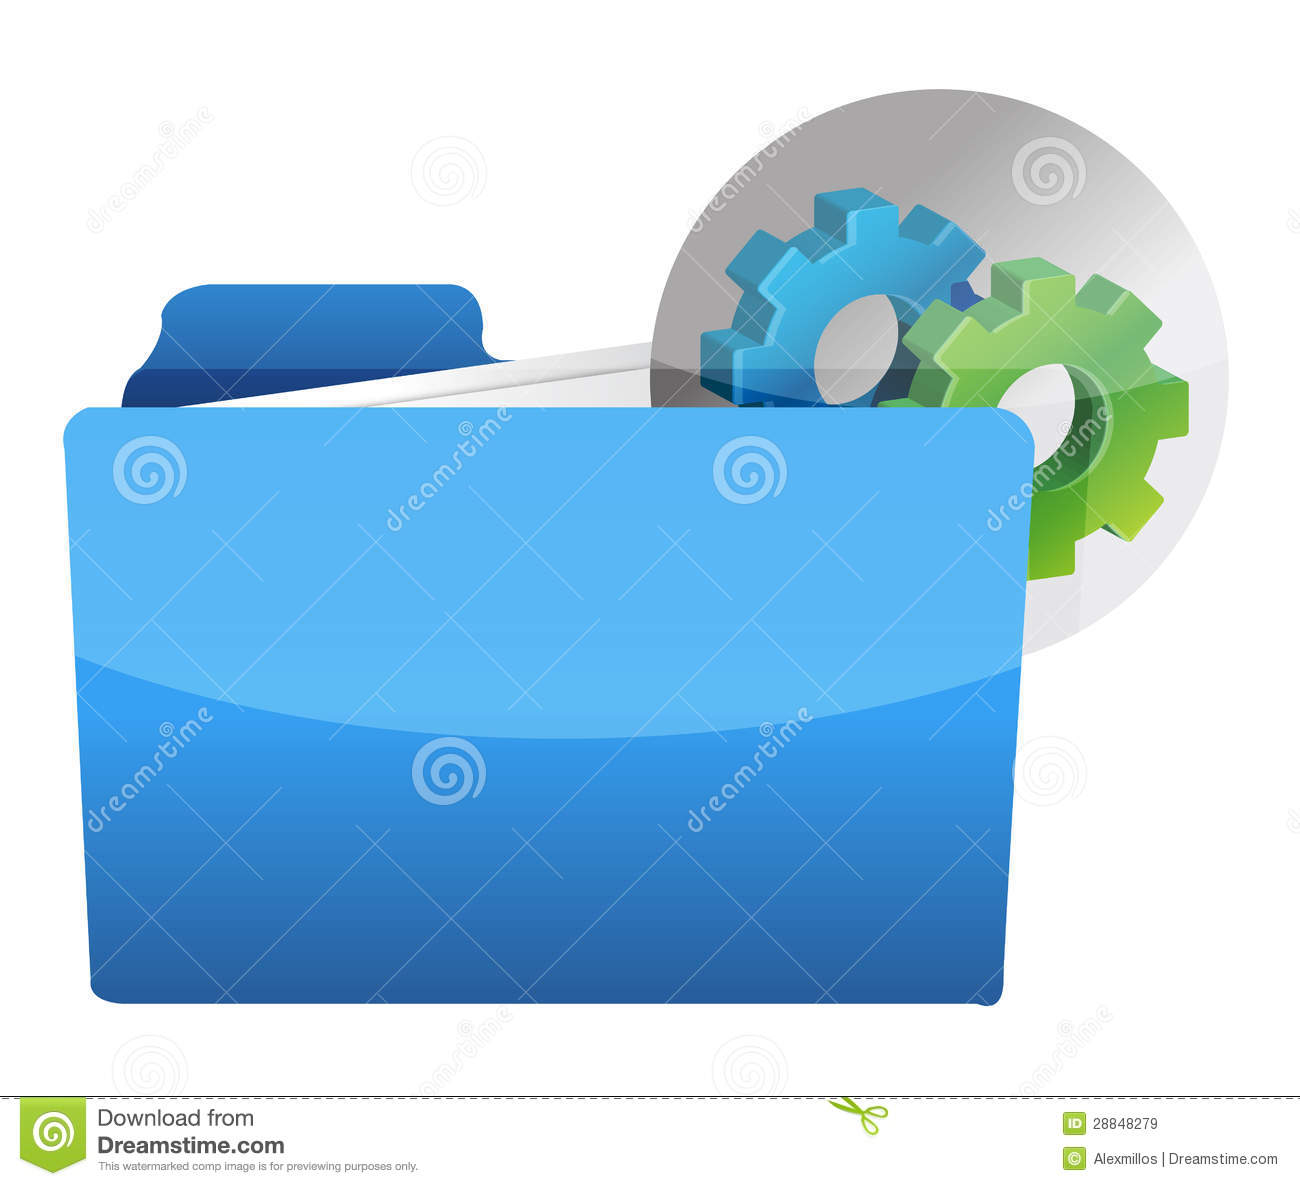 Folder Icon with Gears